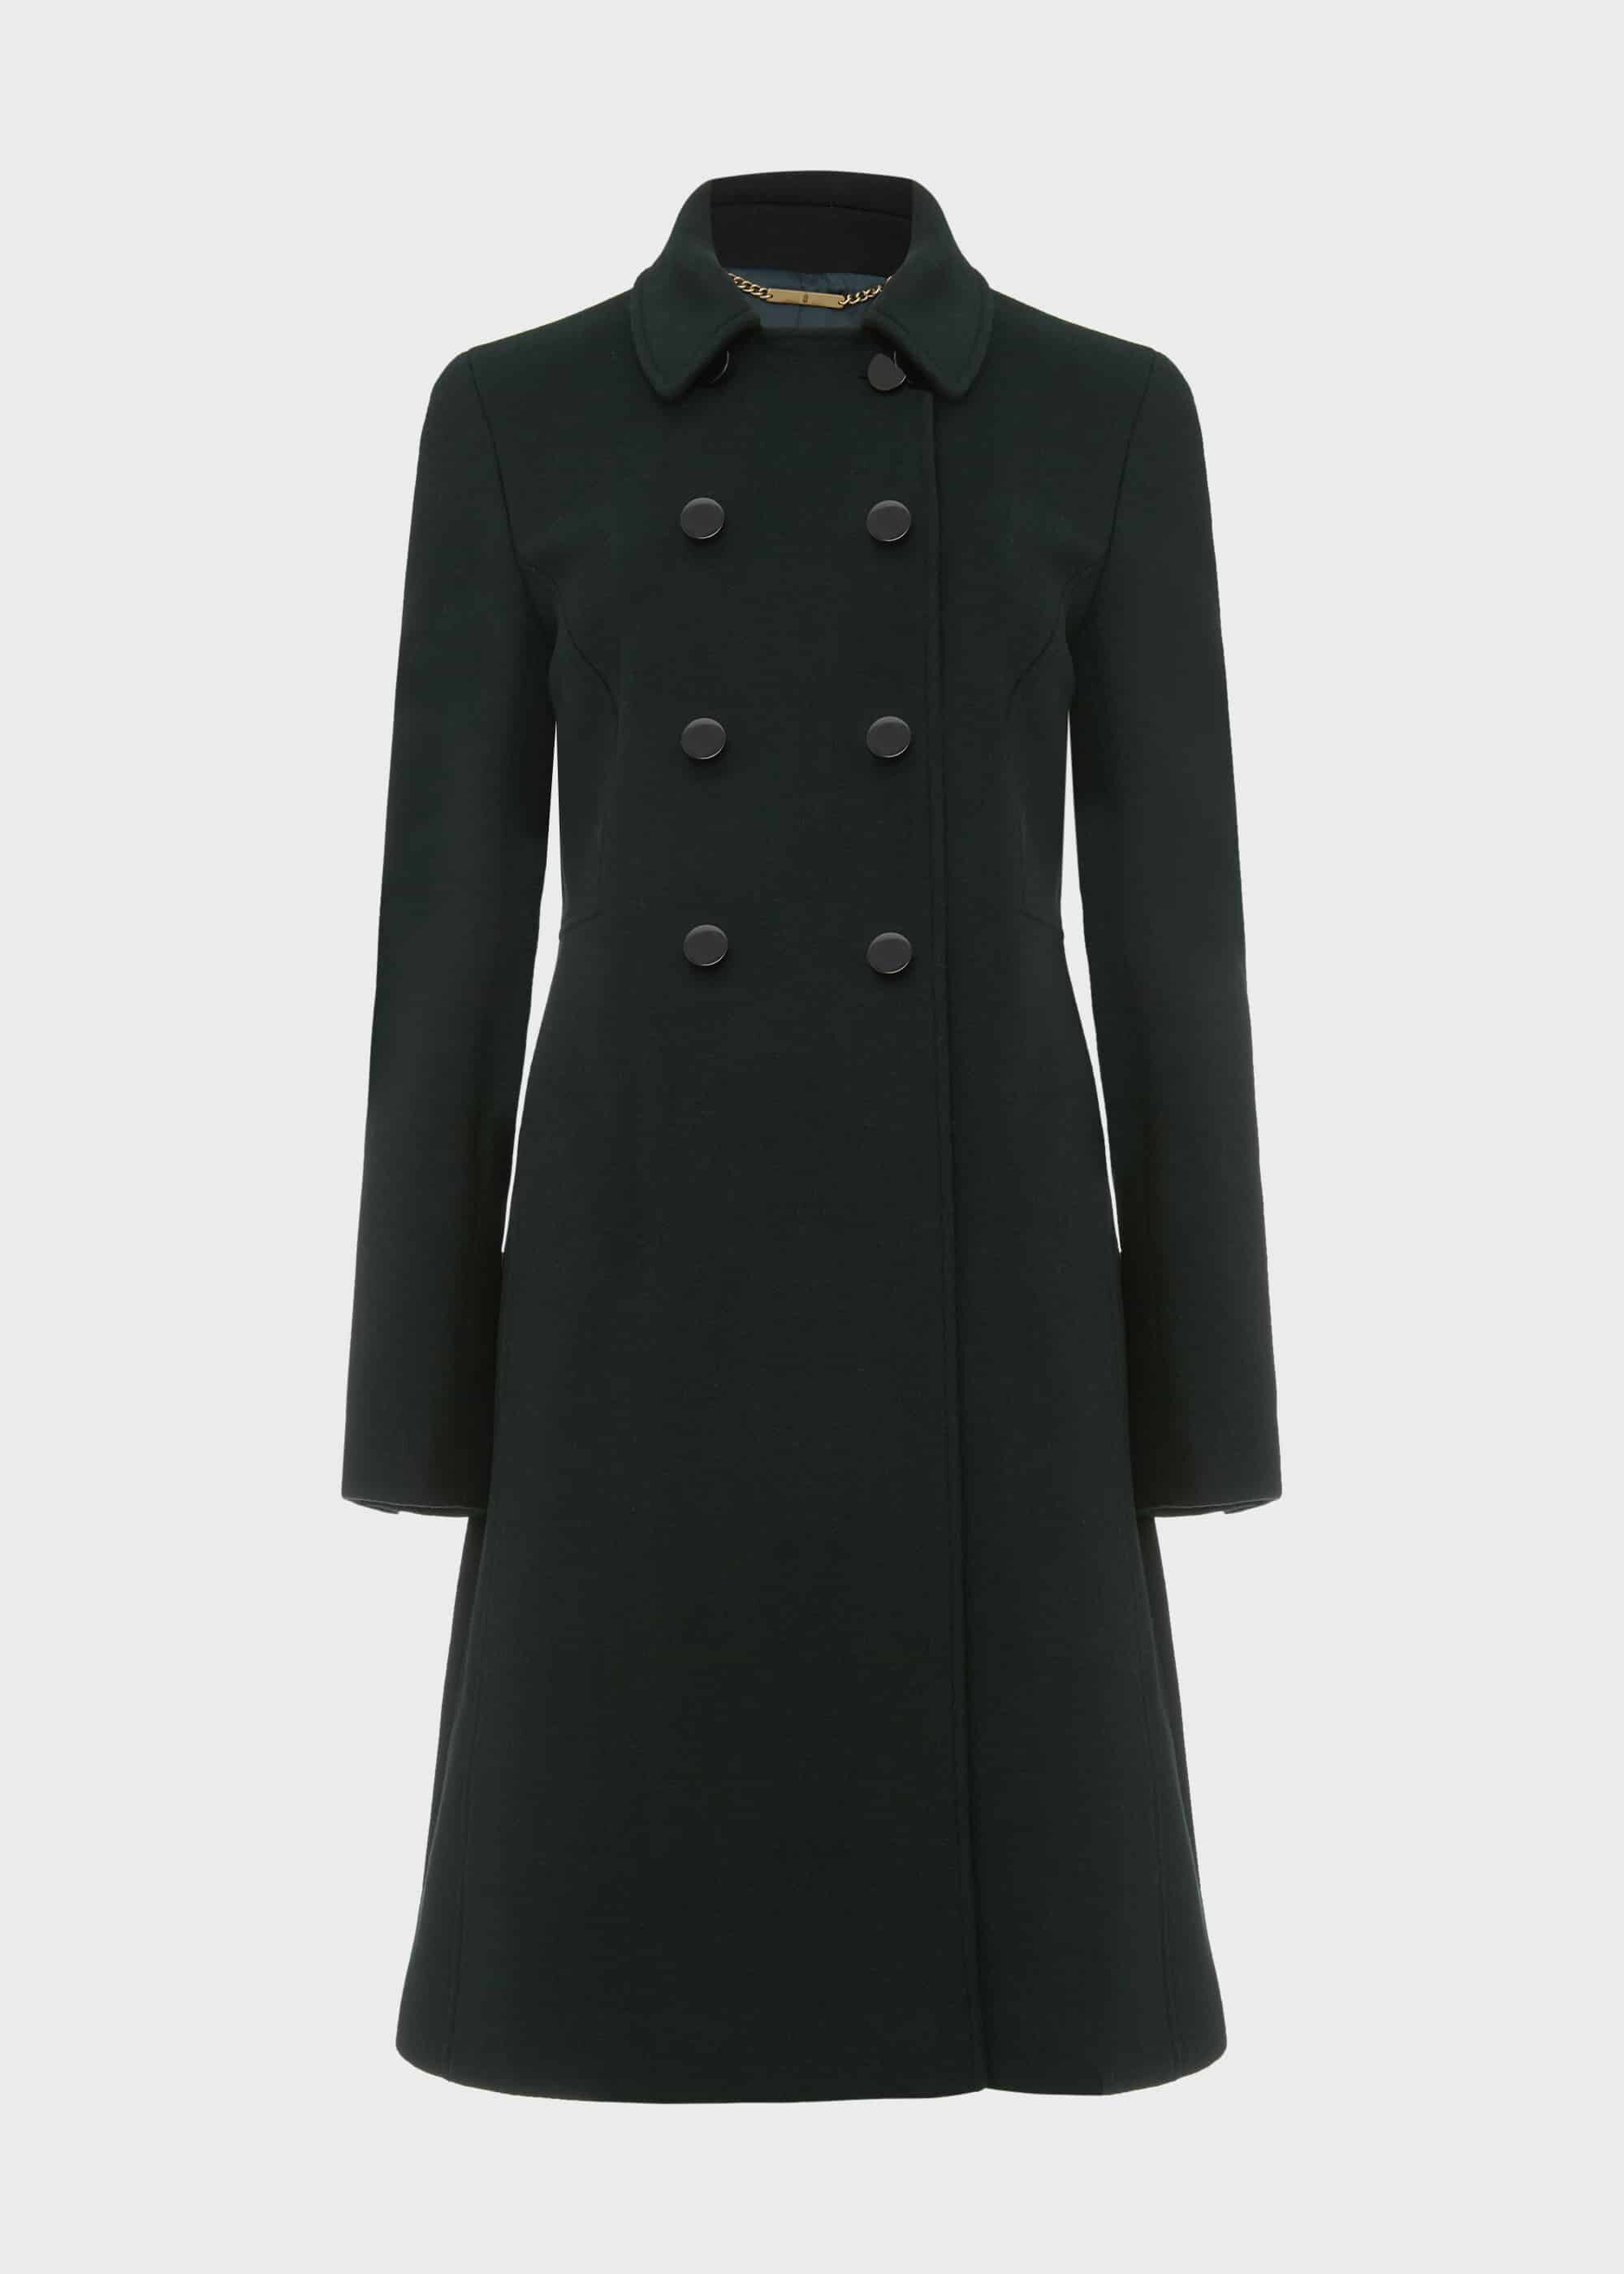 Hobbs Green Coat Sale, 61% OFF | www.angloamericancentre.it